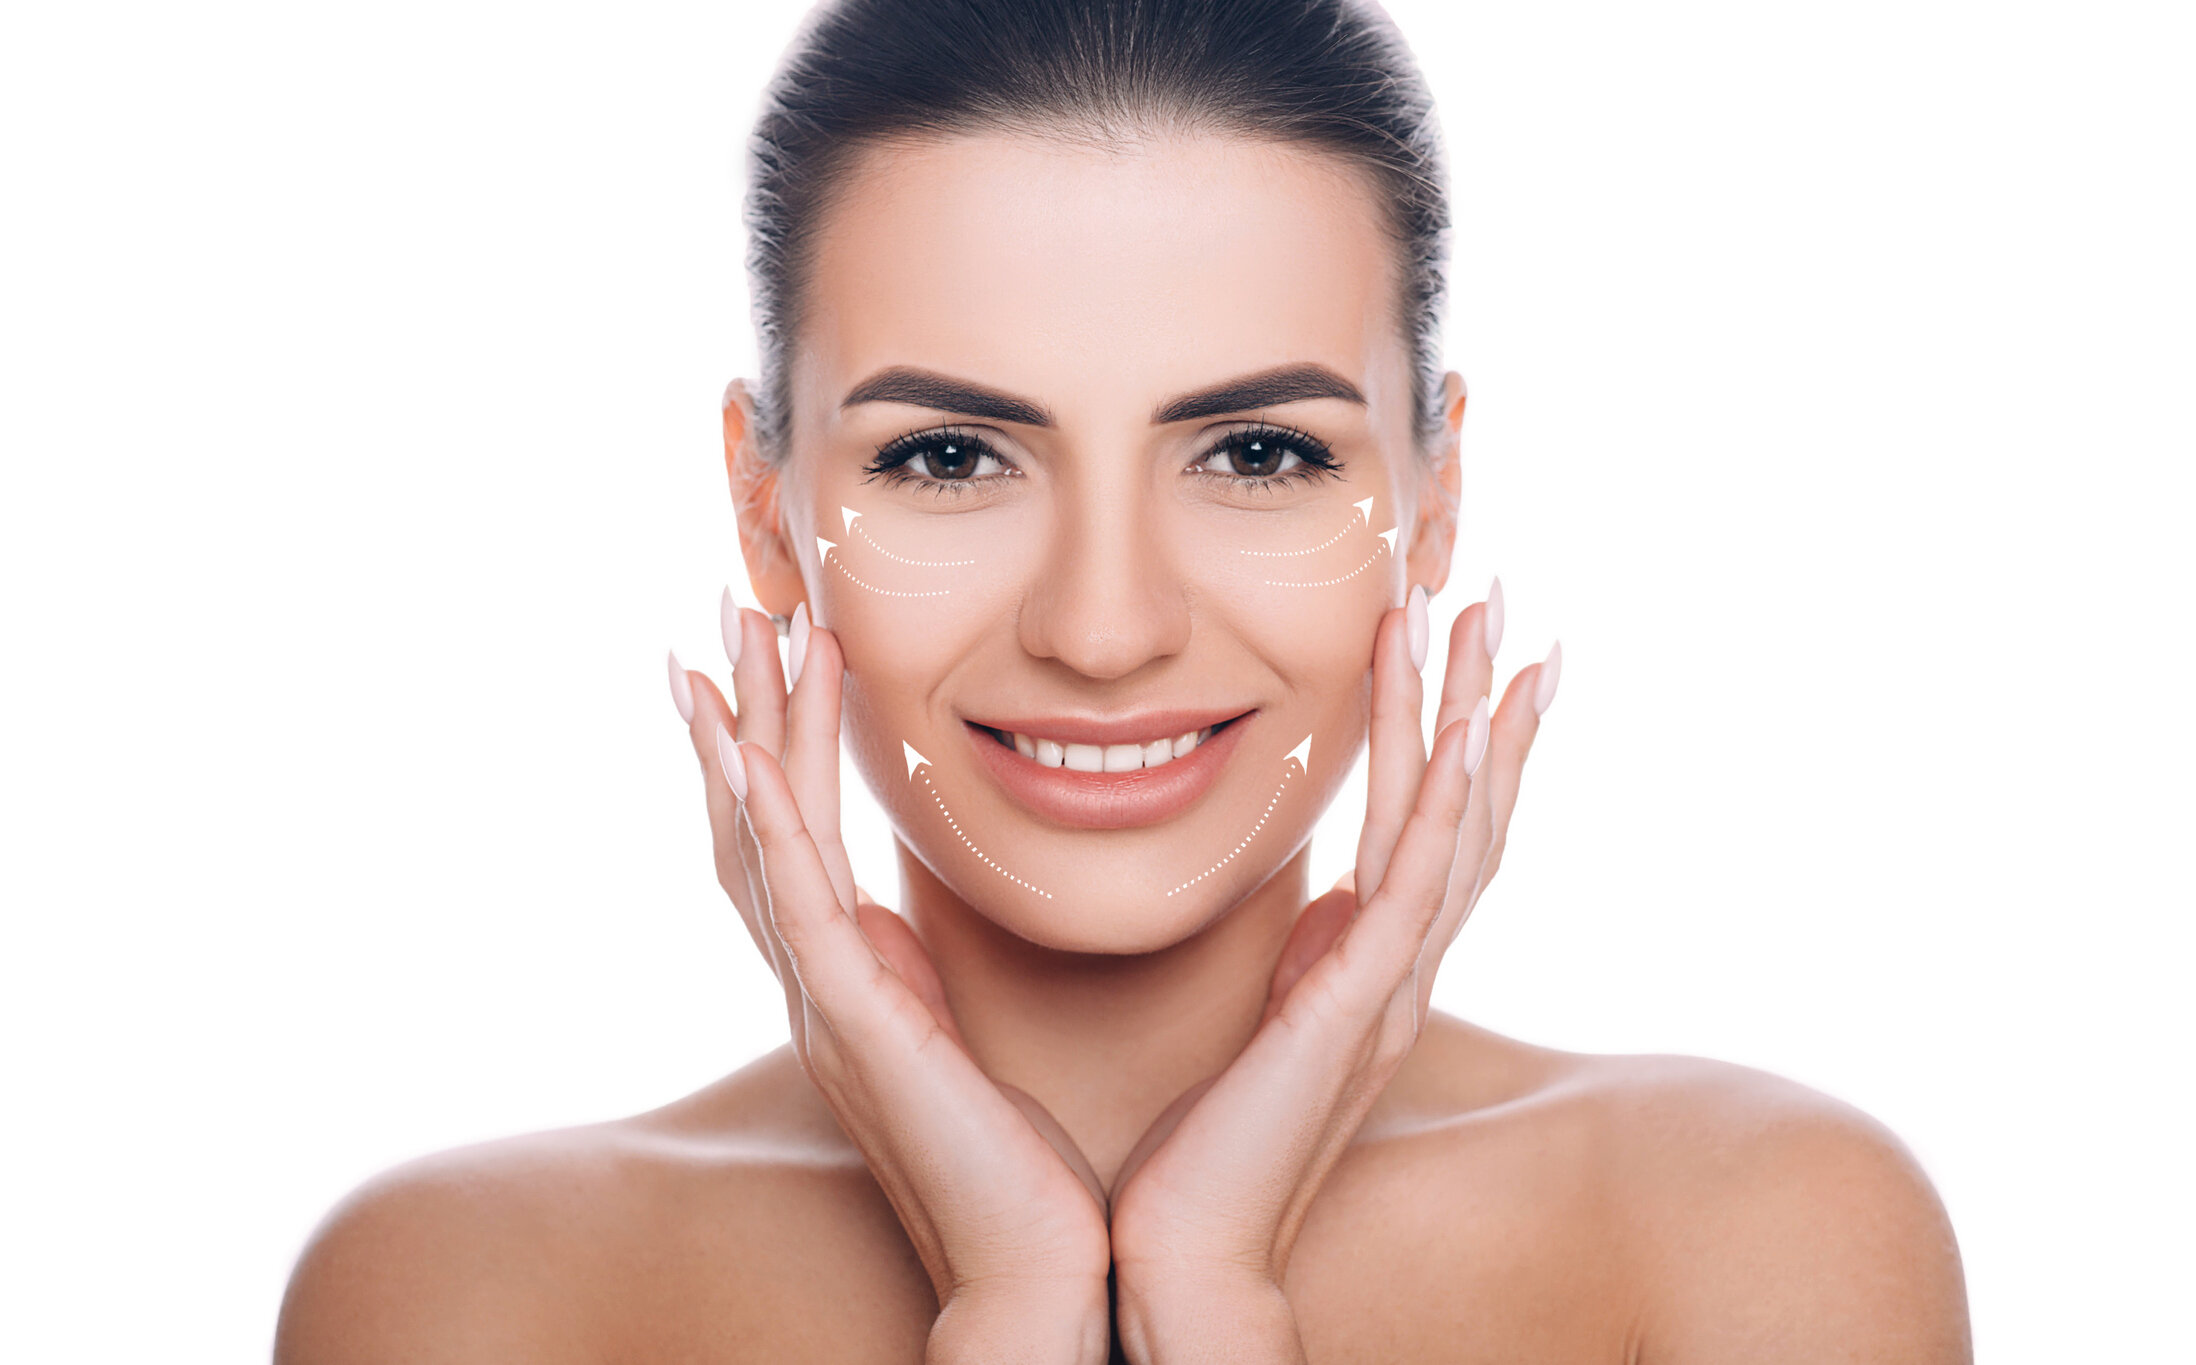 Micro Lifting Treatments Slow Down Aging - Improves Skin